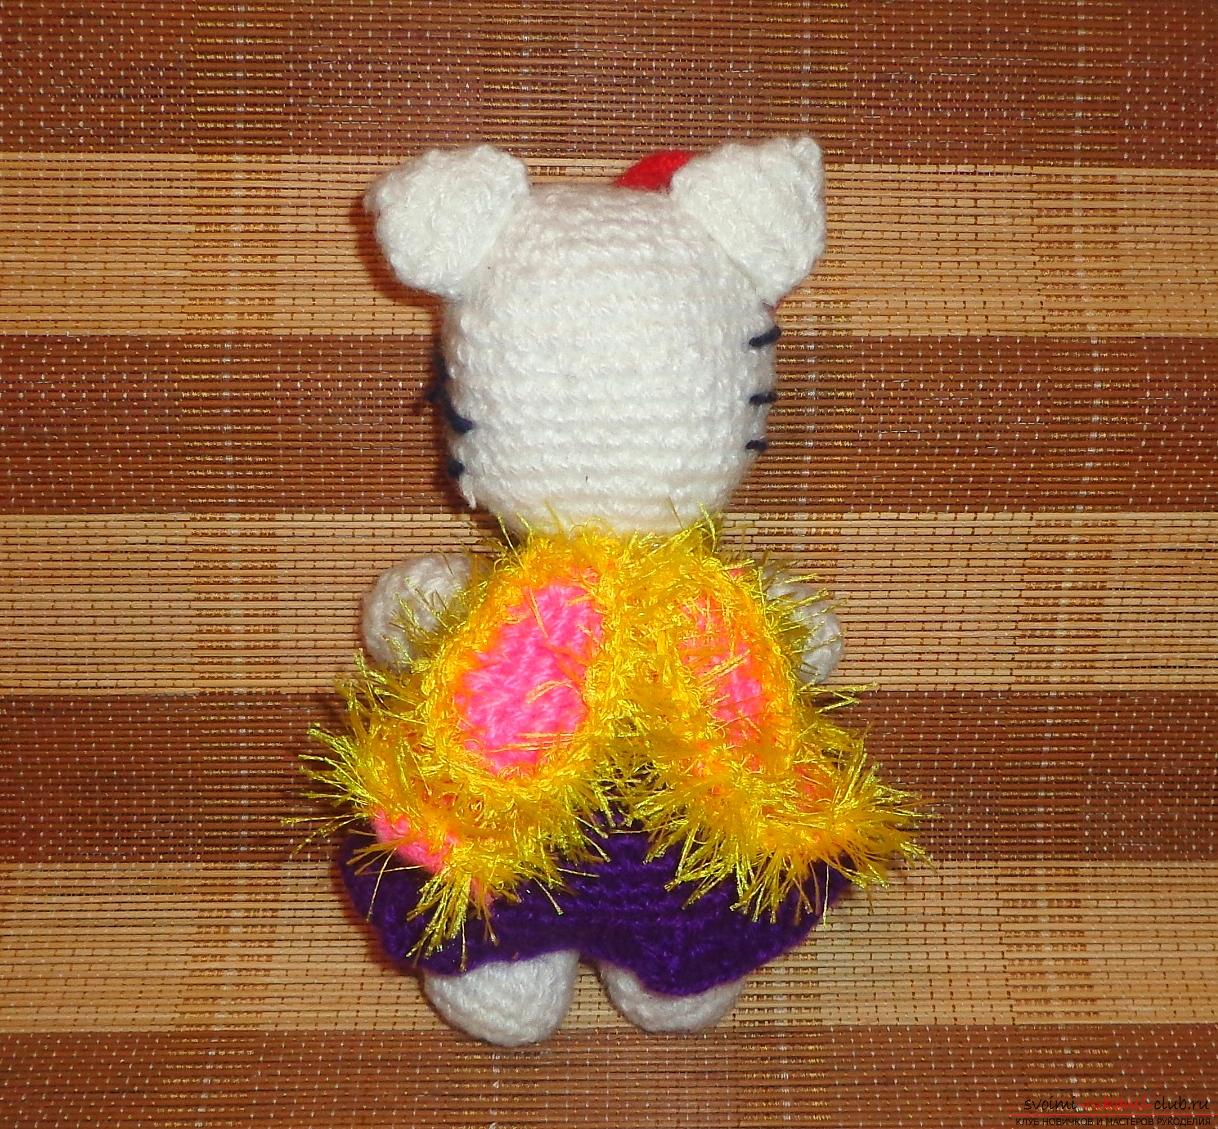 Picture crochet soft toys - kitty 